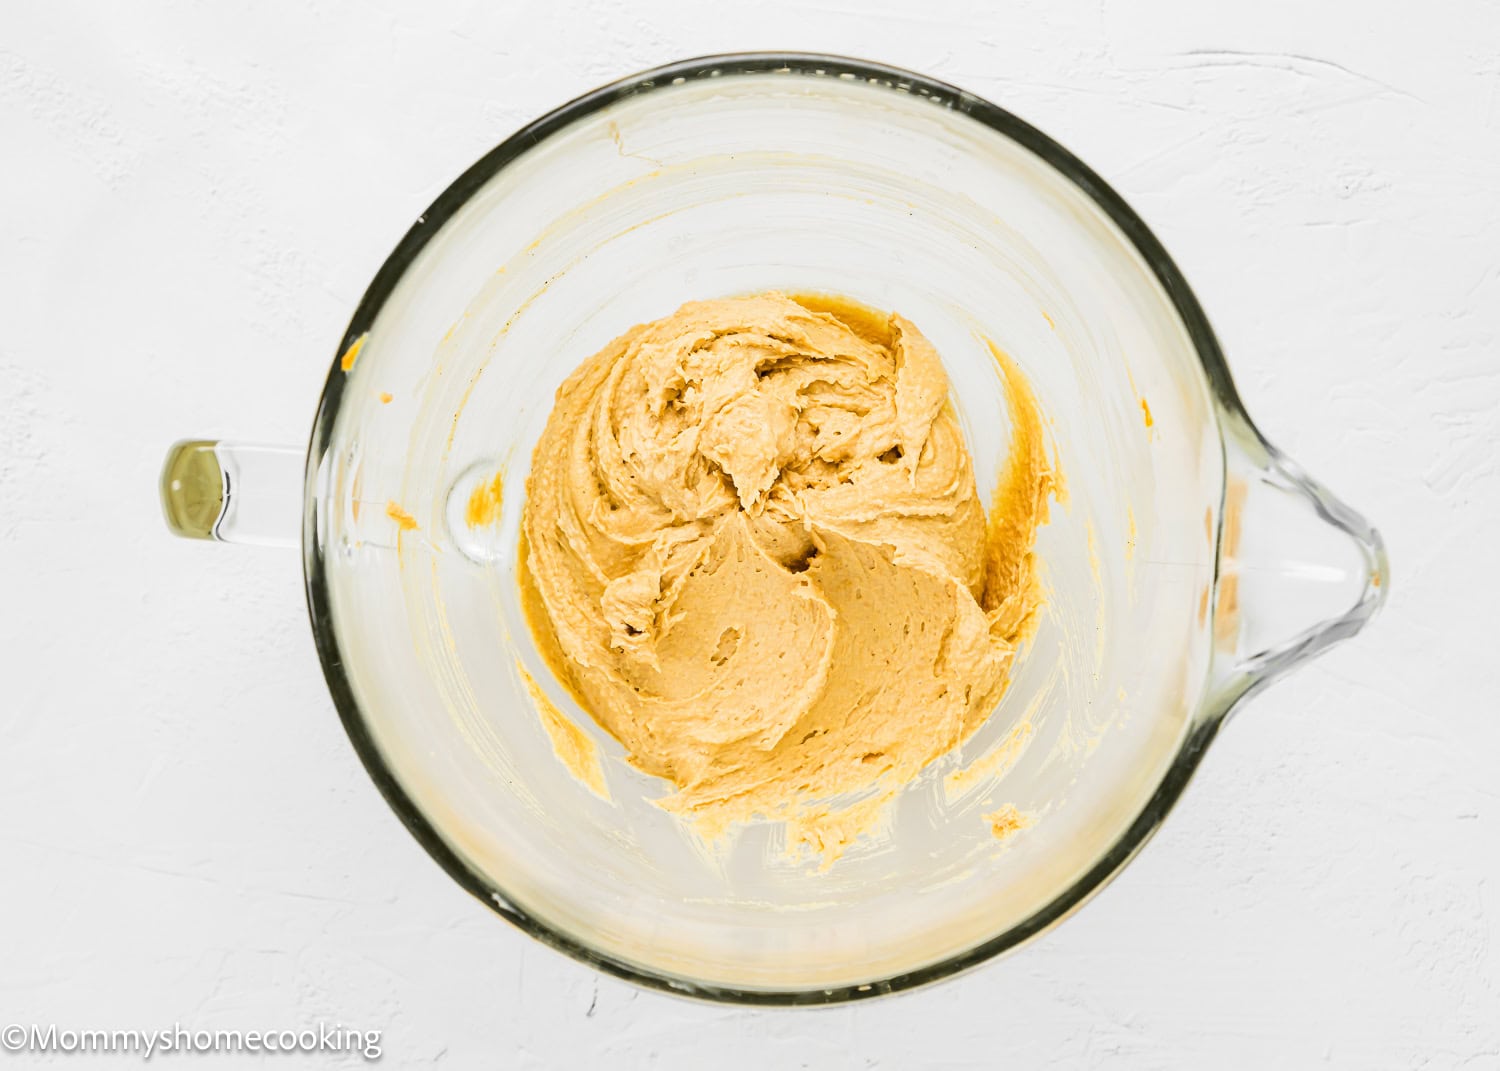 wet ingredients to make egg-free Peanut Butter Cookie dough on a mixer's bowl.